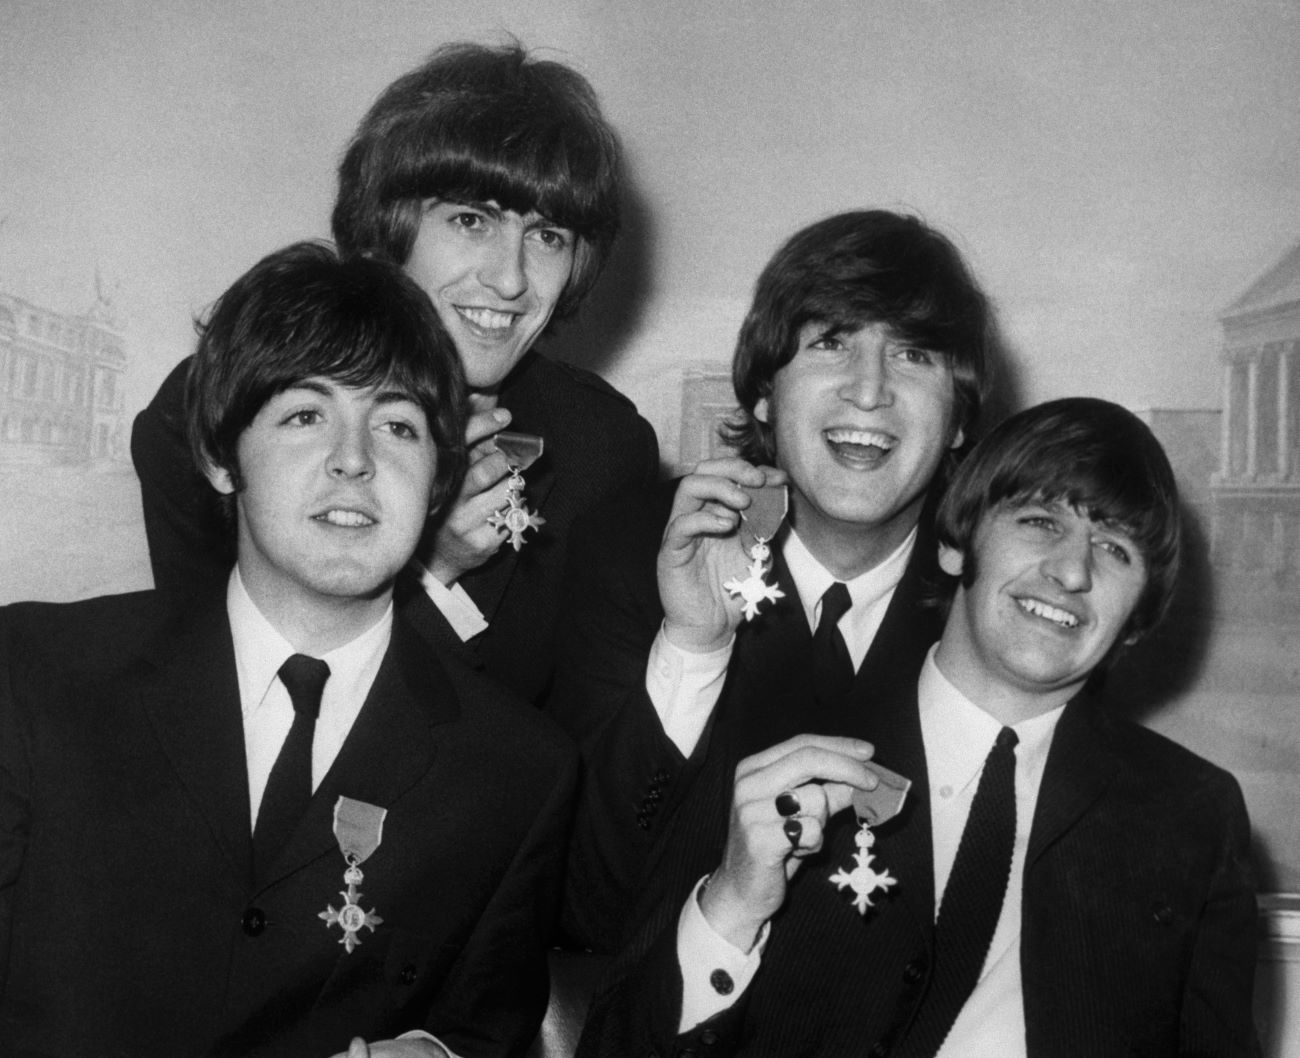 A black and white picture of Paul McCartney, George Harrison, John Lennon, and Ringo Starr holding medals they received from Queen Elizabeth.